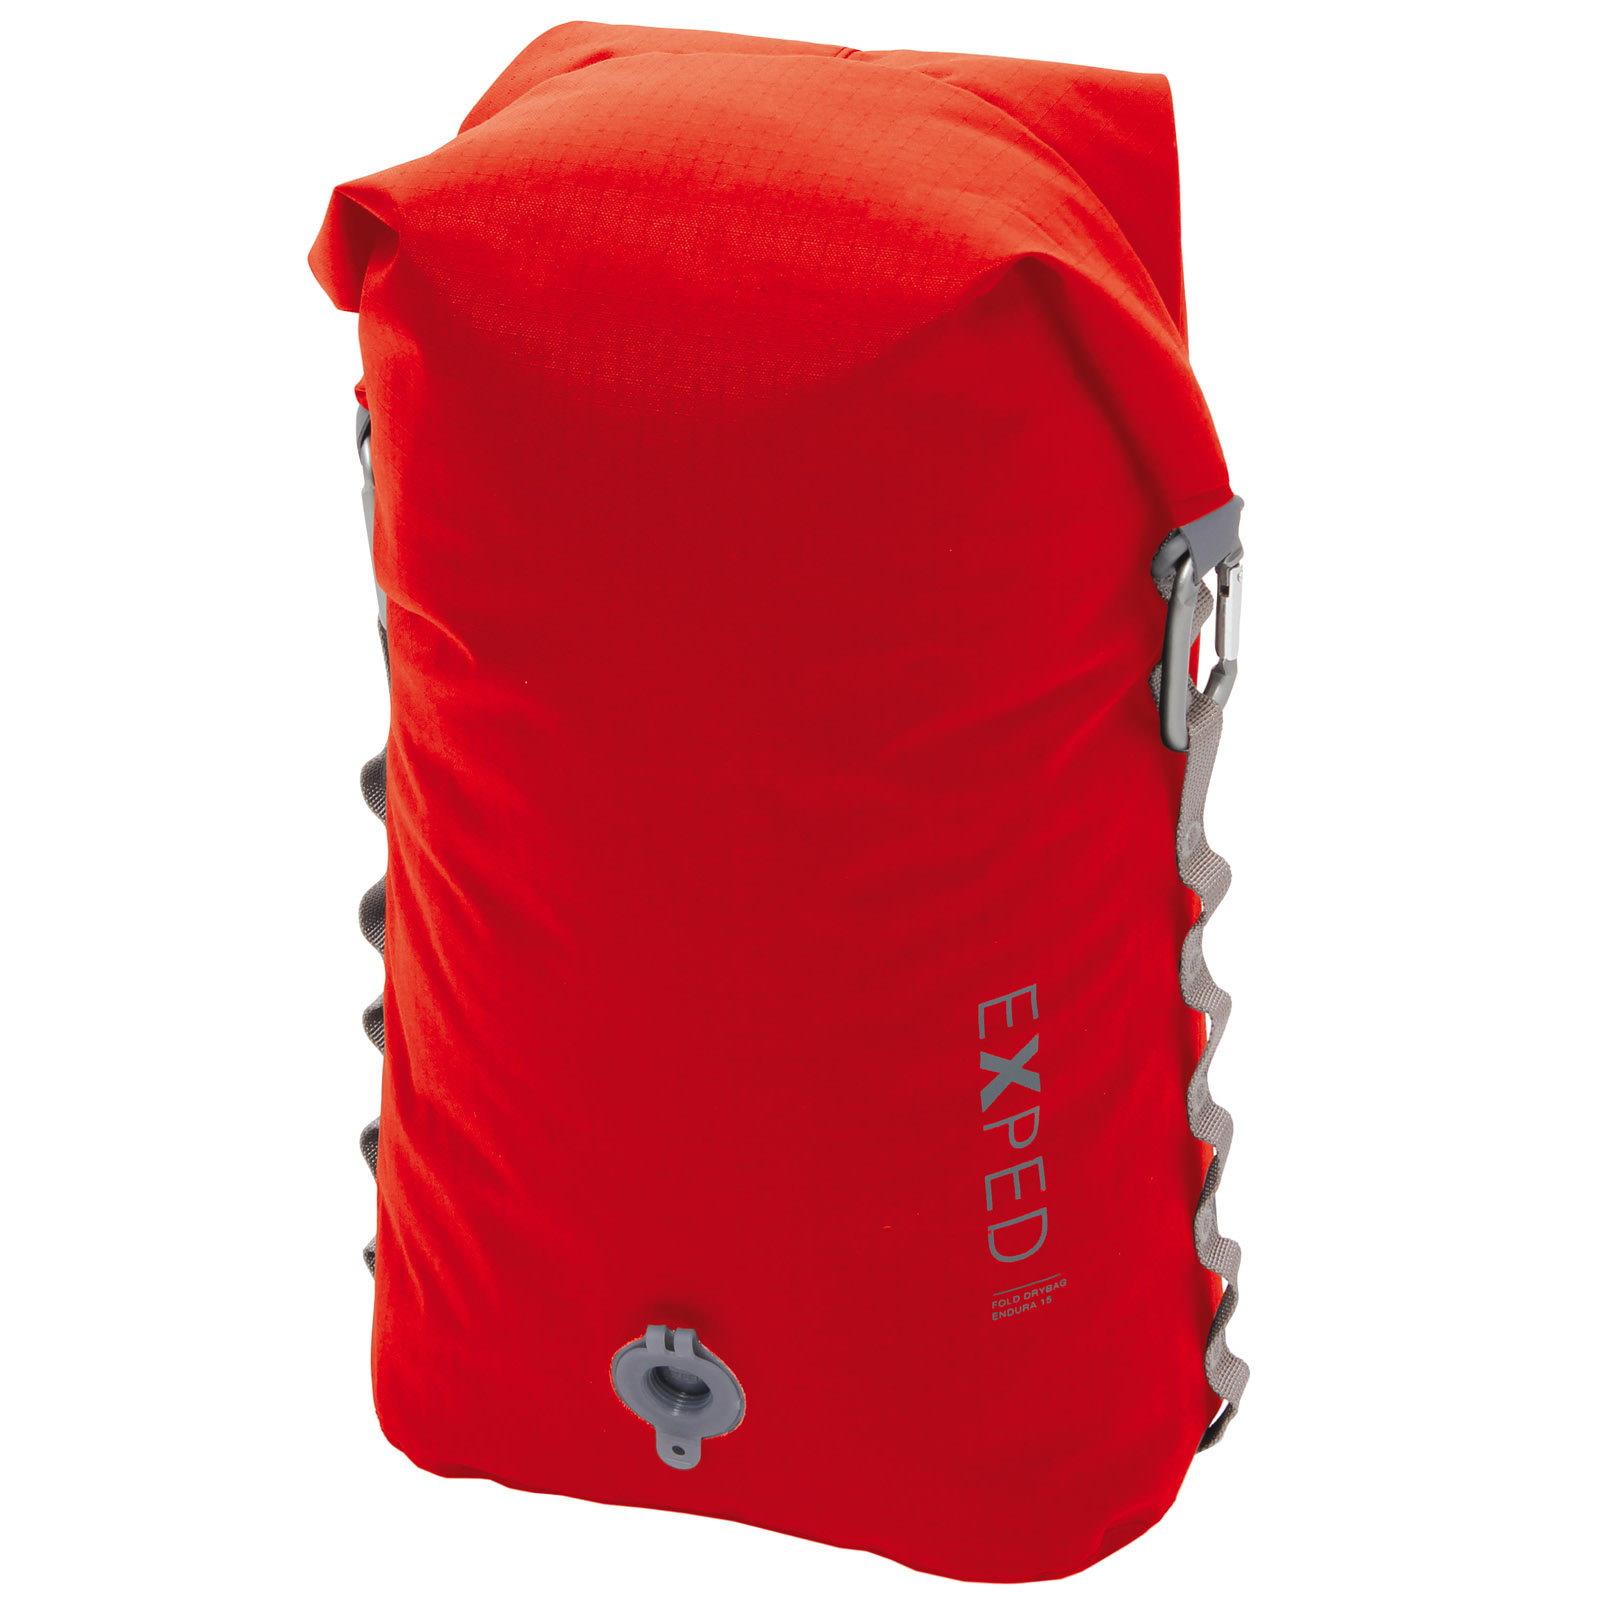 Buy Exped Fold-Drybag Endura 15 from Outnorth